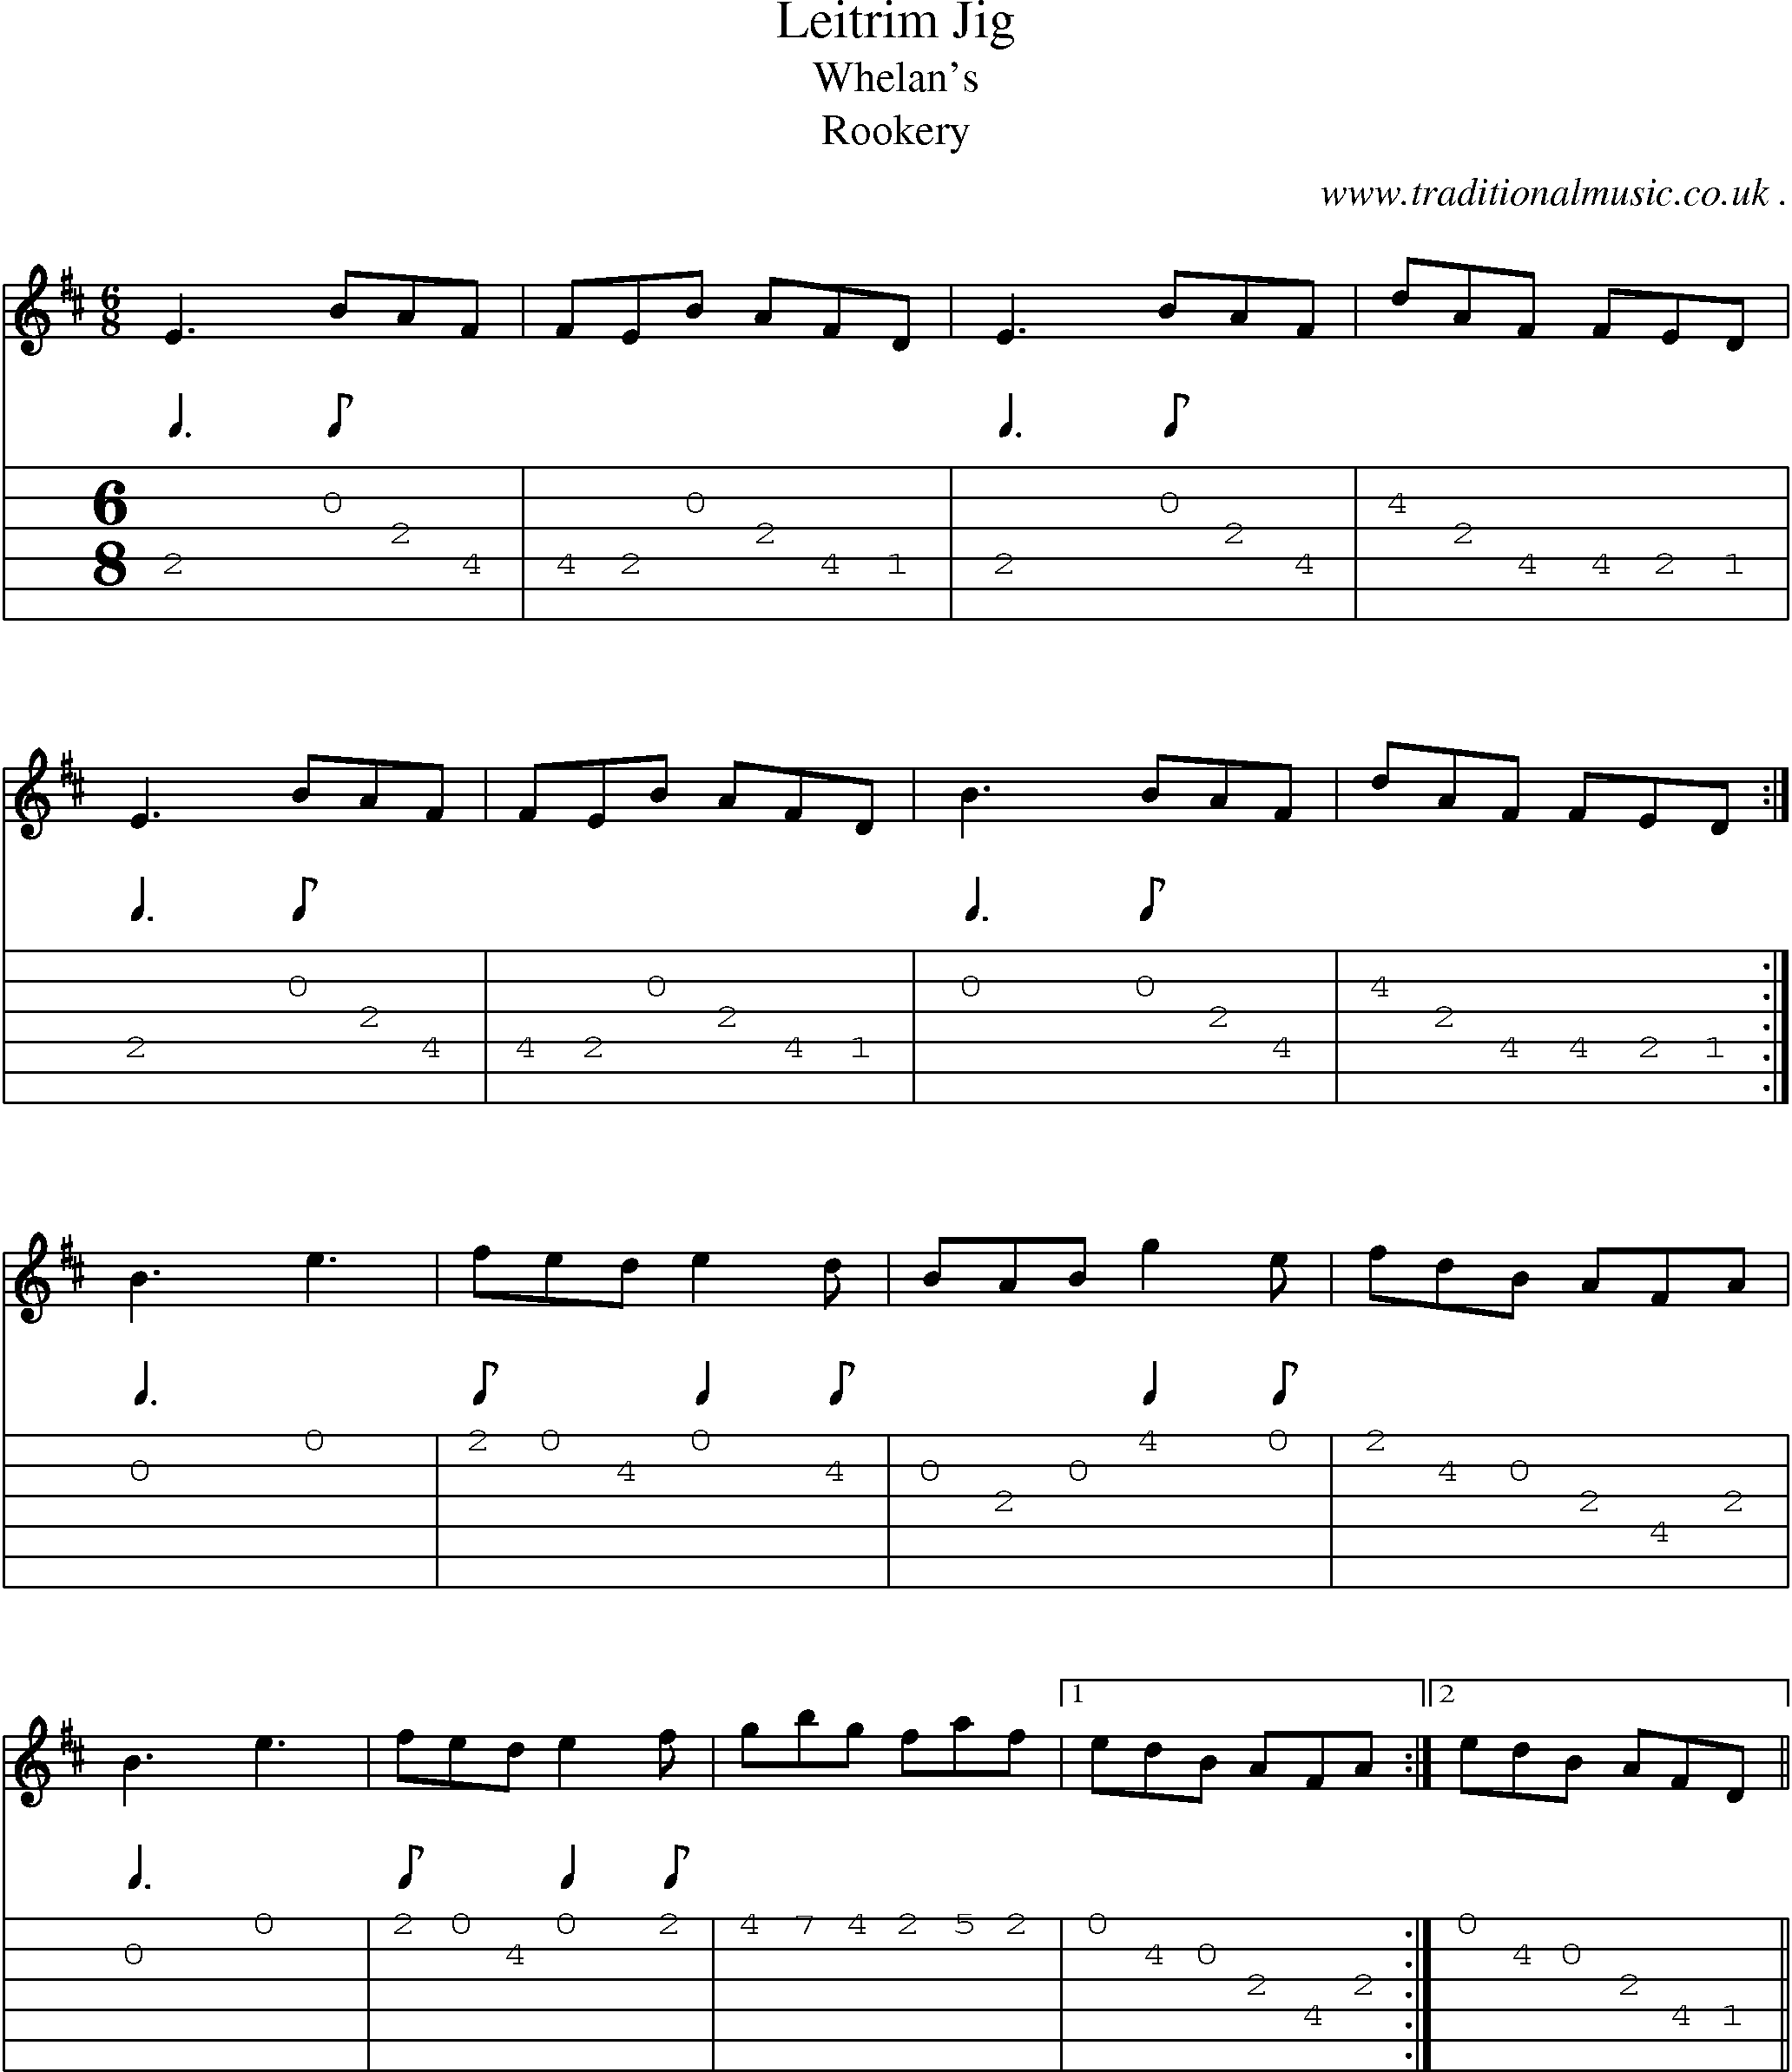 Sheet-Music and Guitar Tabs for Leitrim Jig